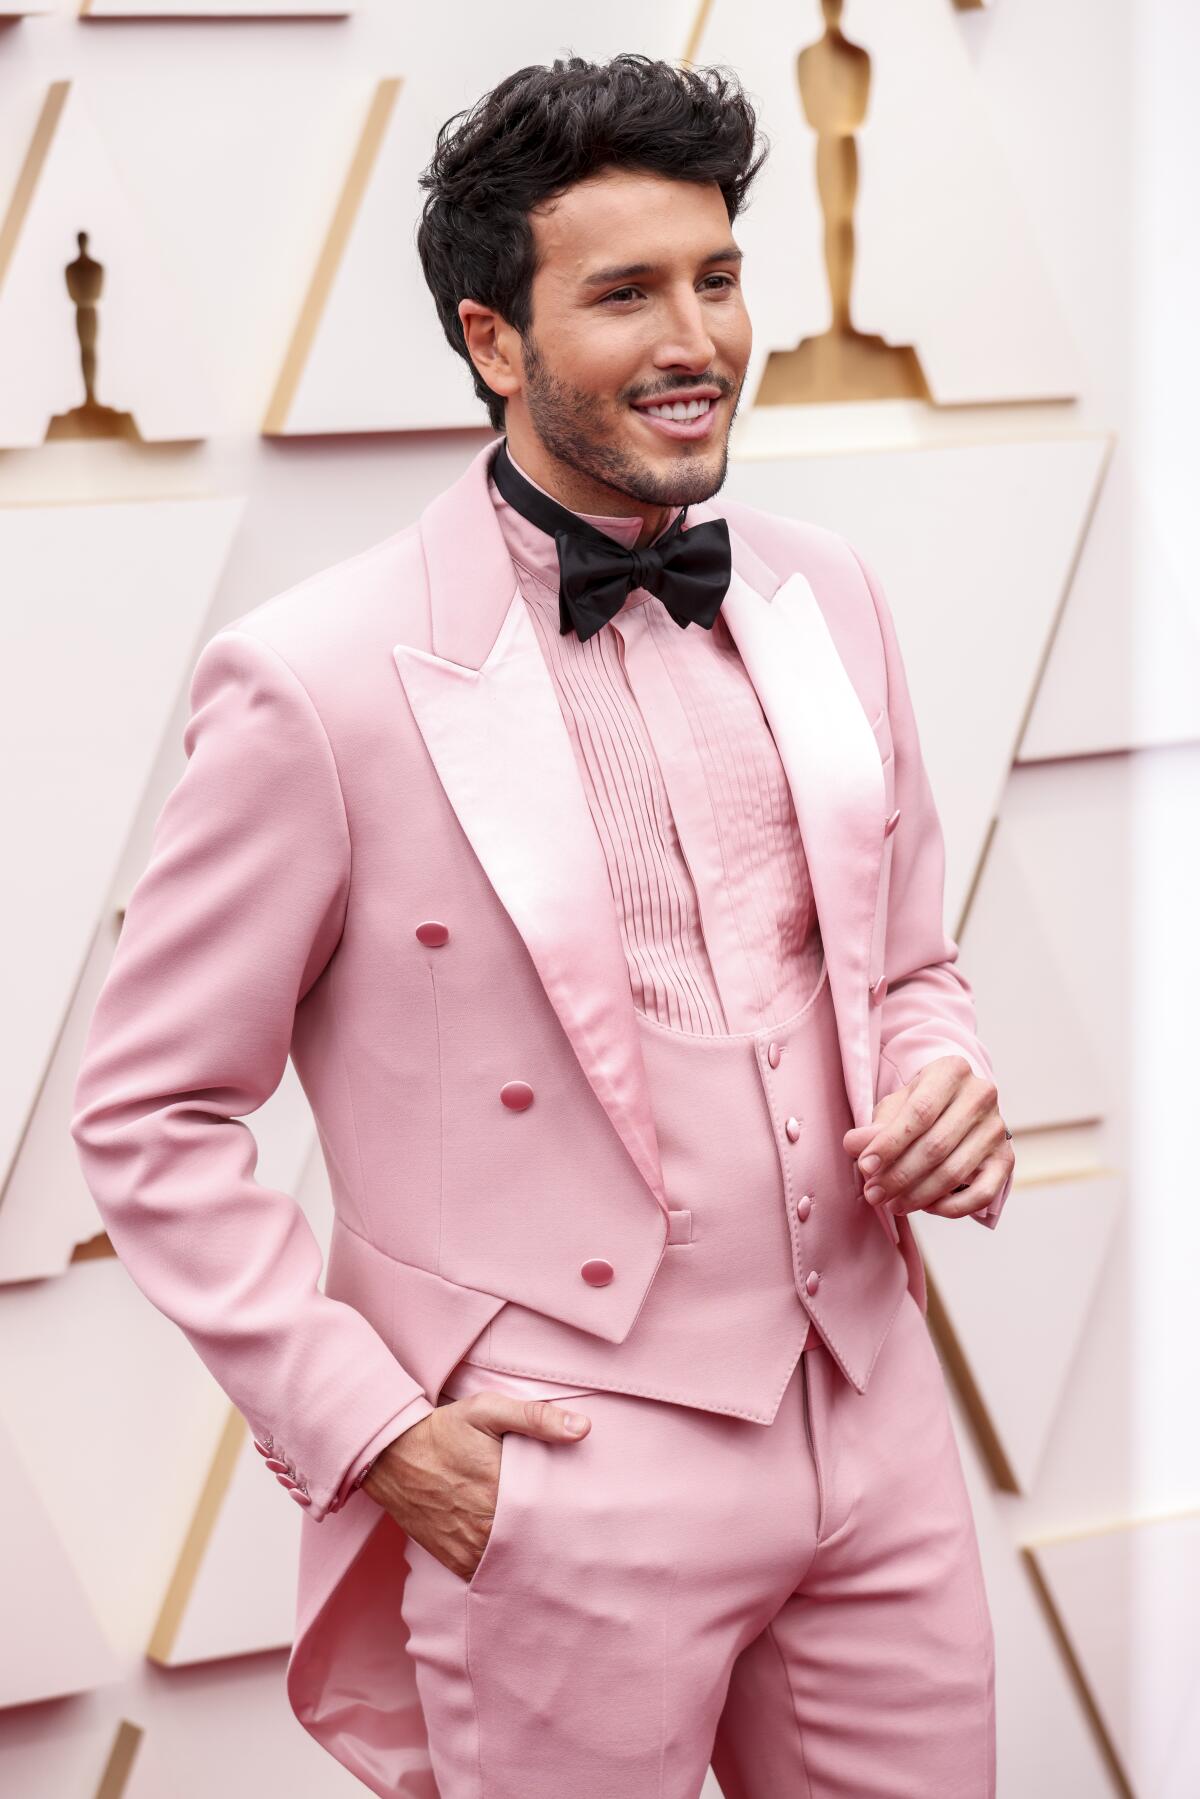 Sebastián Yatra arriving at the 94th Academy Awards at the Dolby Theatre at Ovation Hollywood on Sunday, March 27, 2022